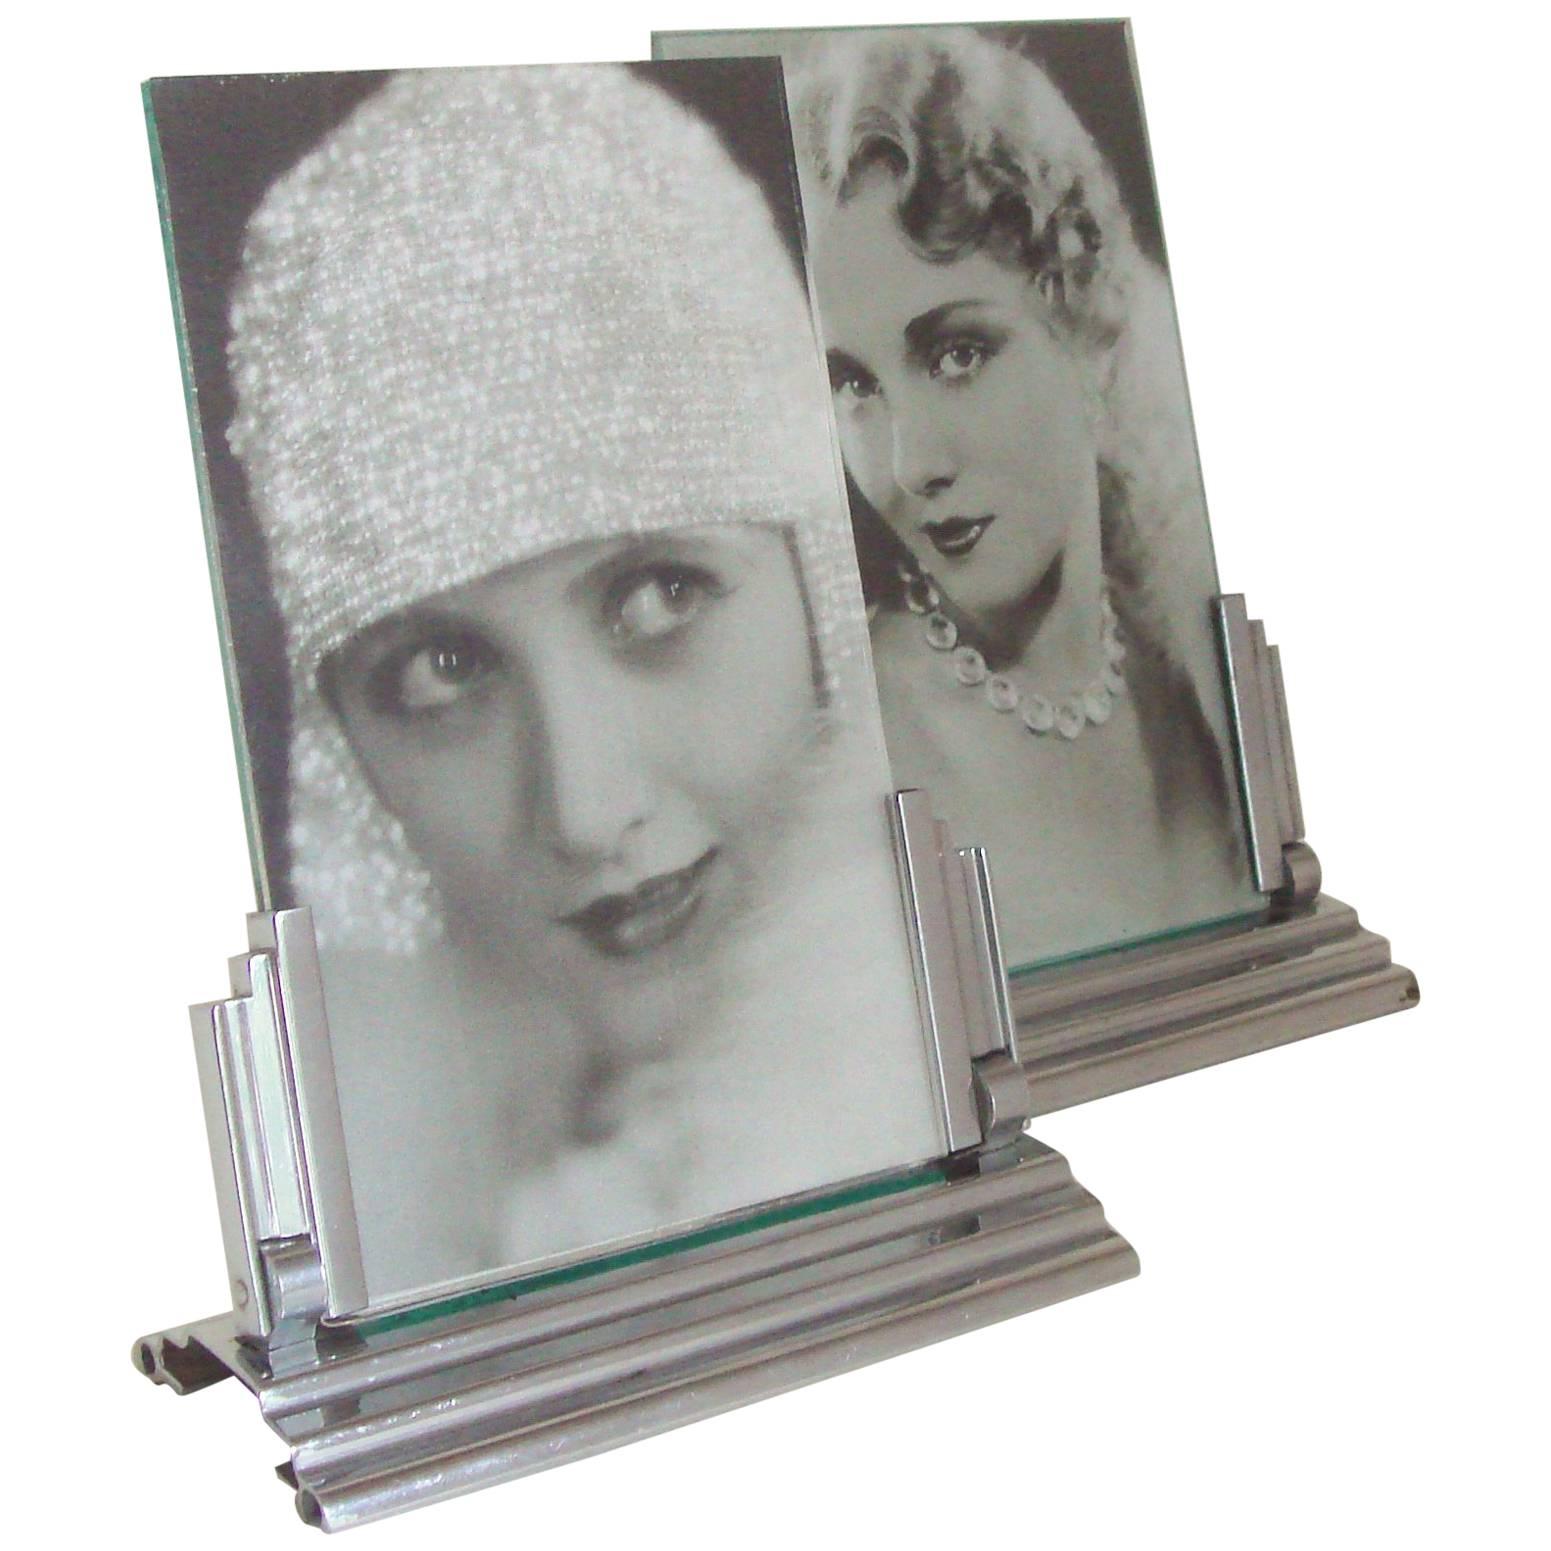 Pair of French Art Deco Chrome Ziguratt Stepped and Angled Photo Frames